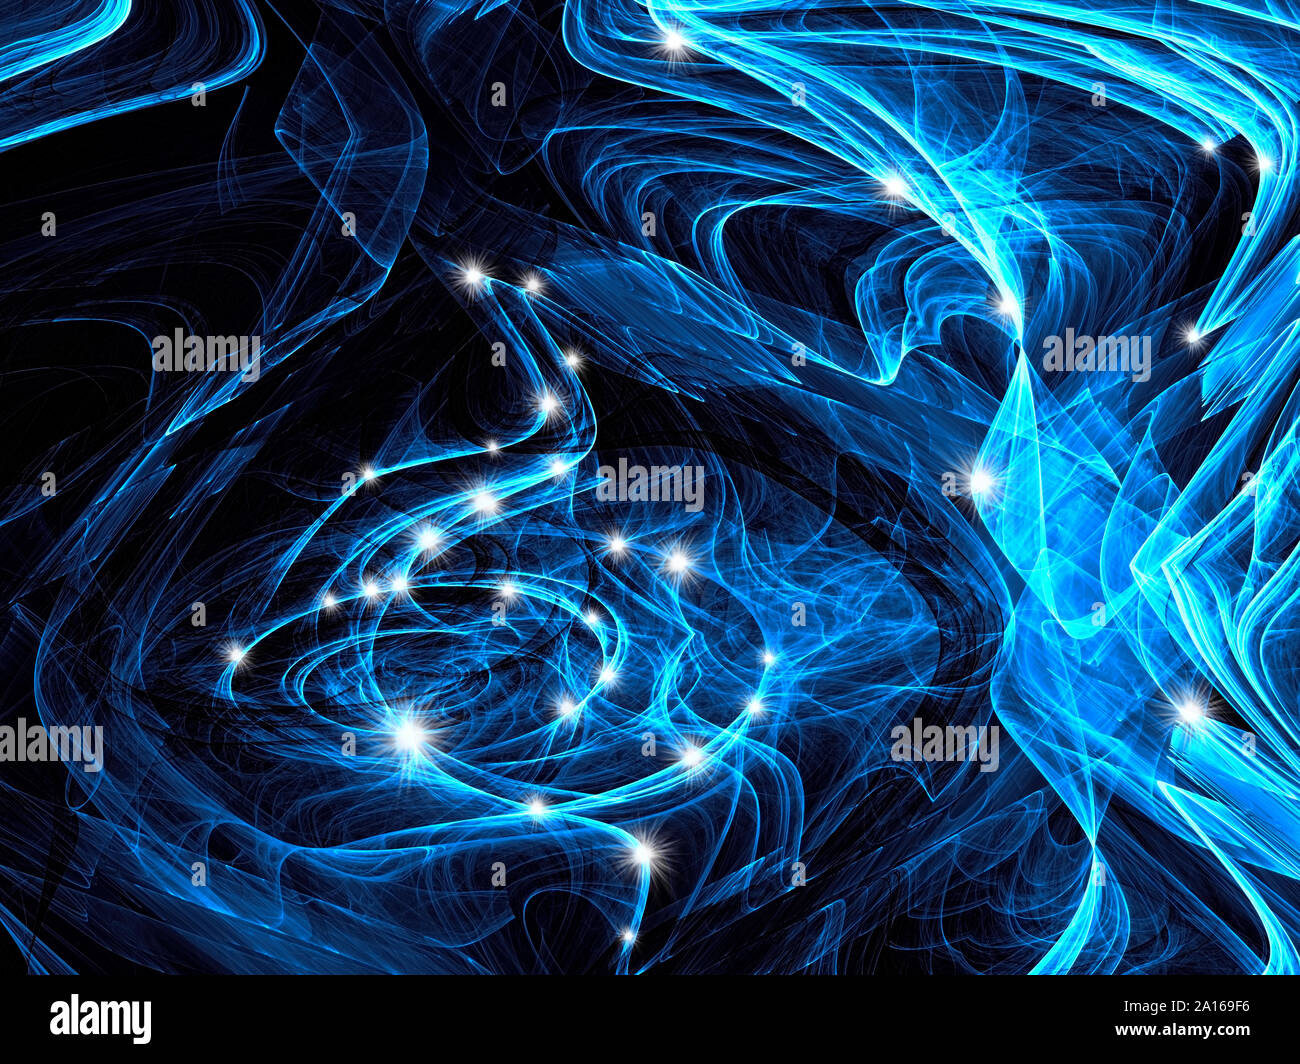 Abstract chaos curves and strokes - digitally generated image Stock Photo